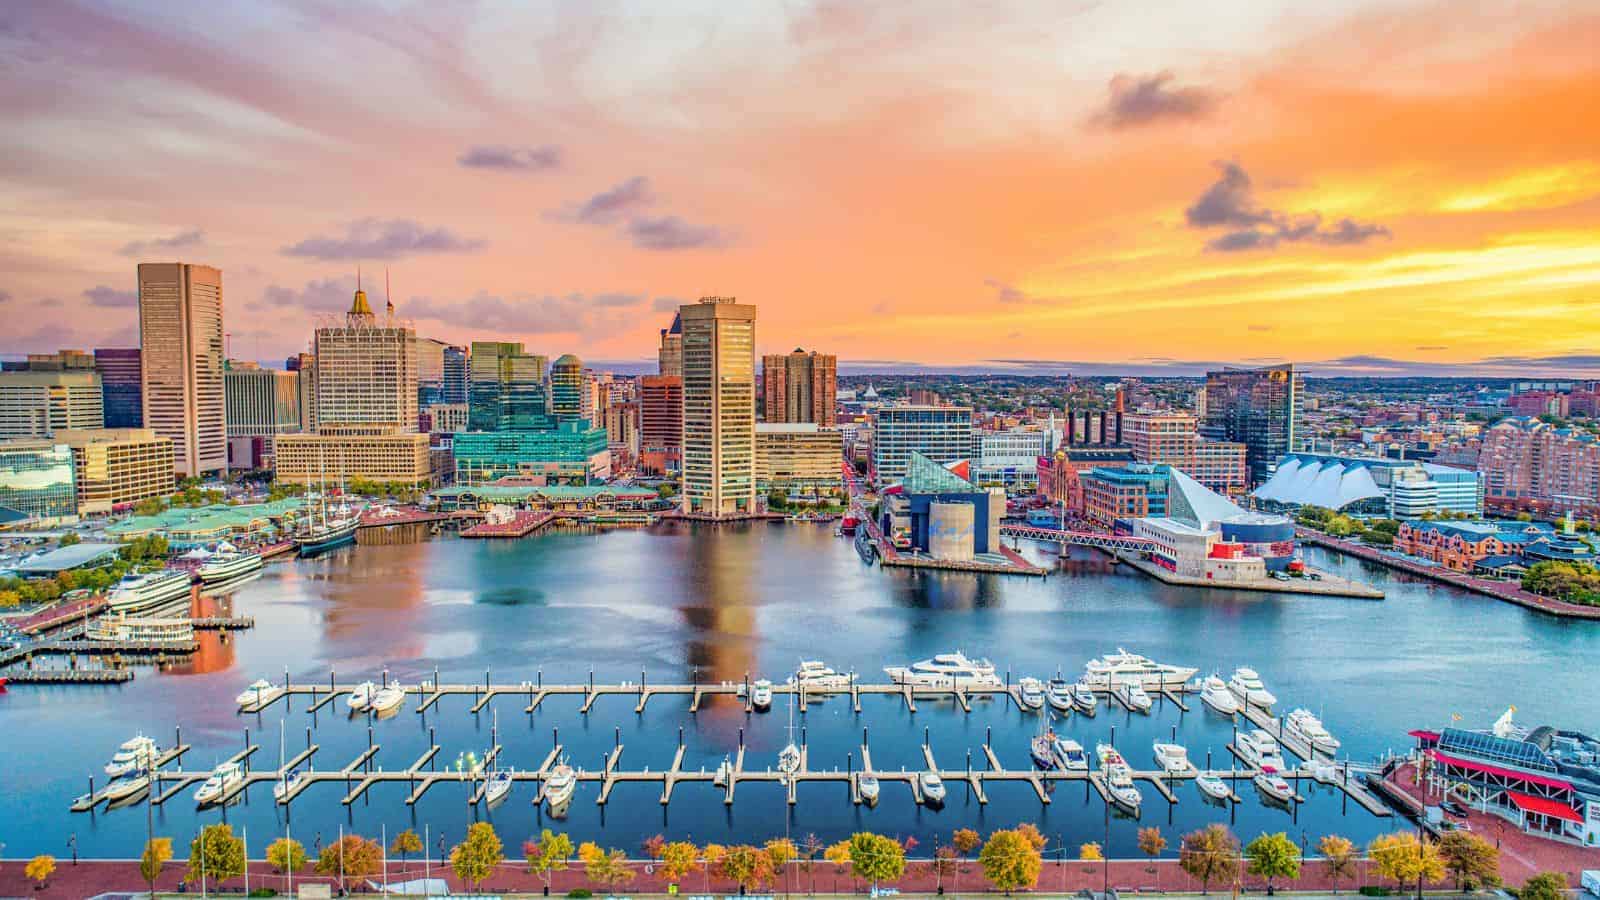 <p>Baltimore is another city you should avoid if you want a relaxing vacation. It’s notorious for its high crime rate, including violent crime, and its lack of cleanliness. <a href="https://housefresh.com/the-dirtiest-cities-in-america/">House Fresh</a> has named Baltimore the dirtiest city in the US, with 47,295 sanitation-related complaints, so it loses points for pleasantness, too.</p>